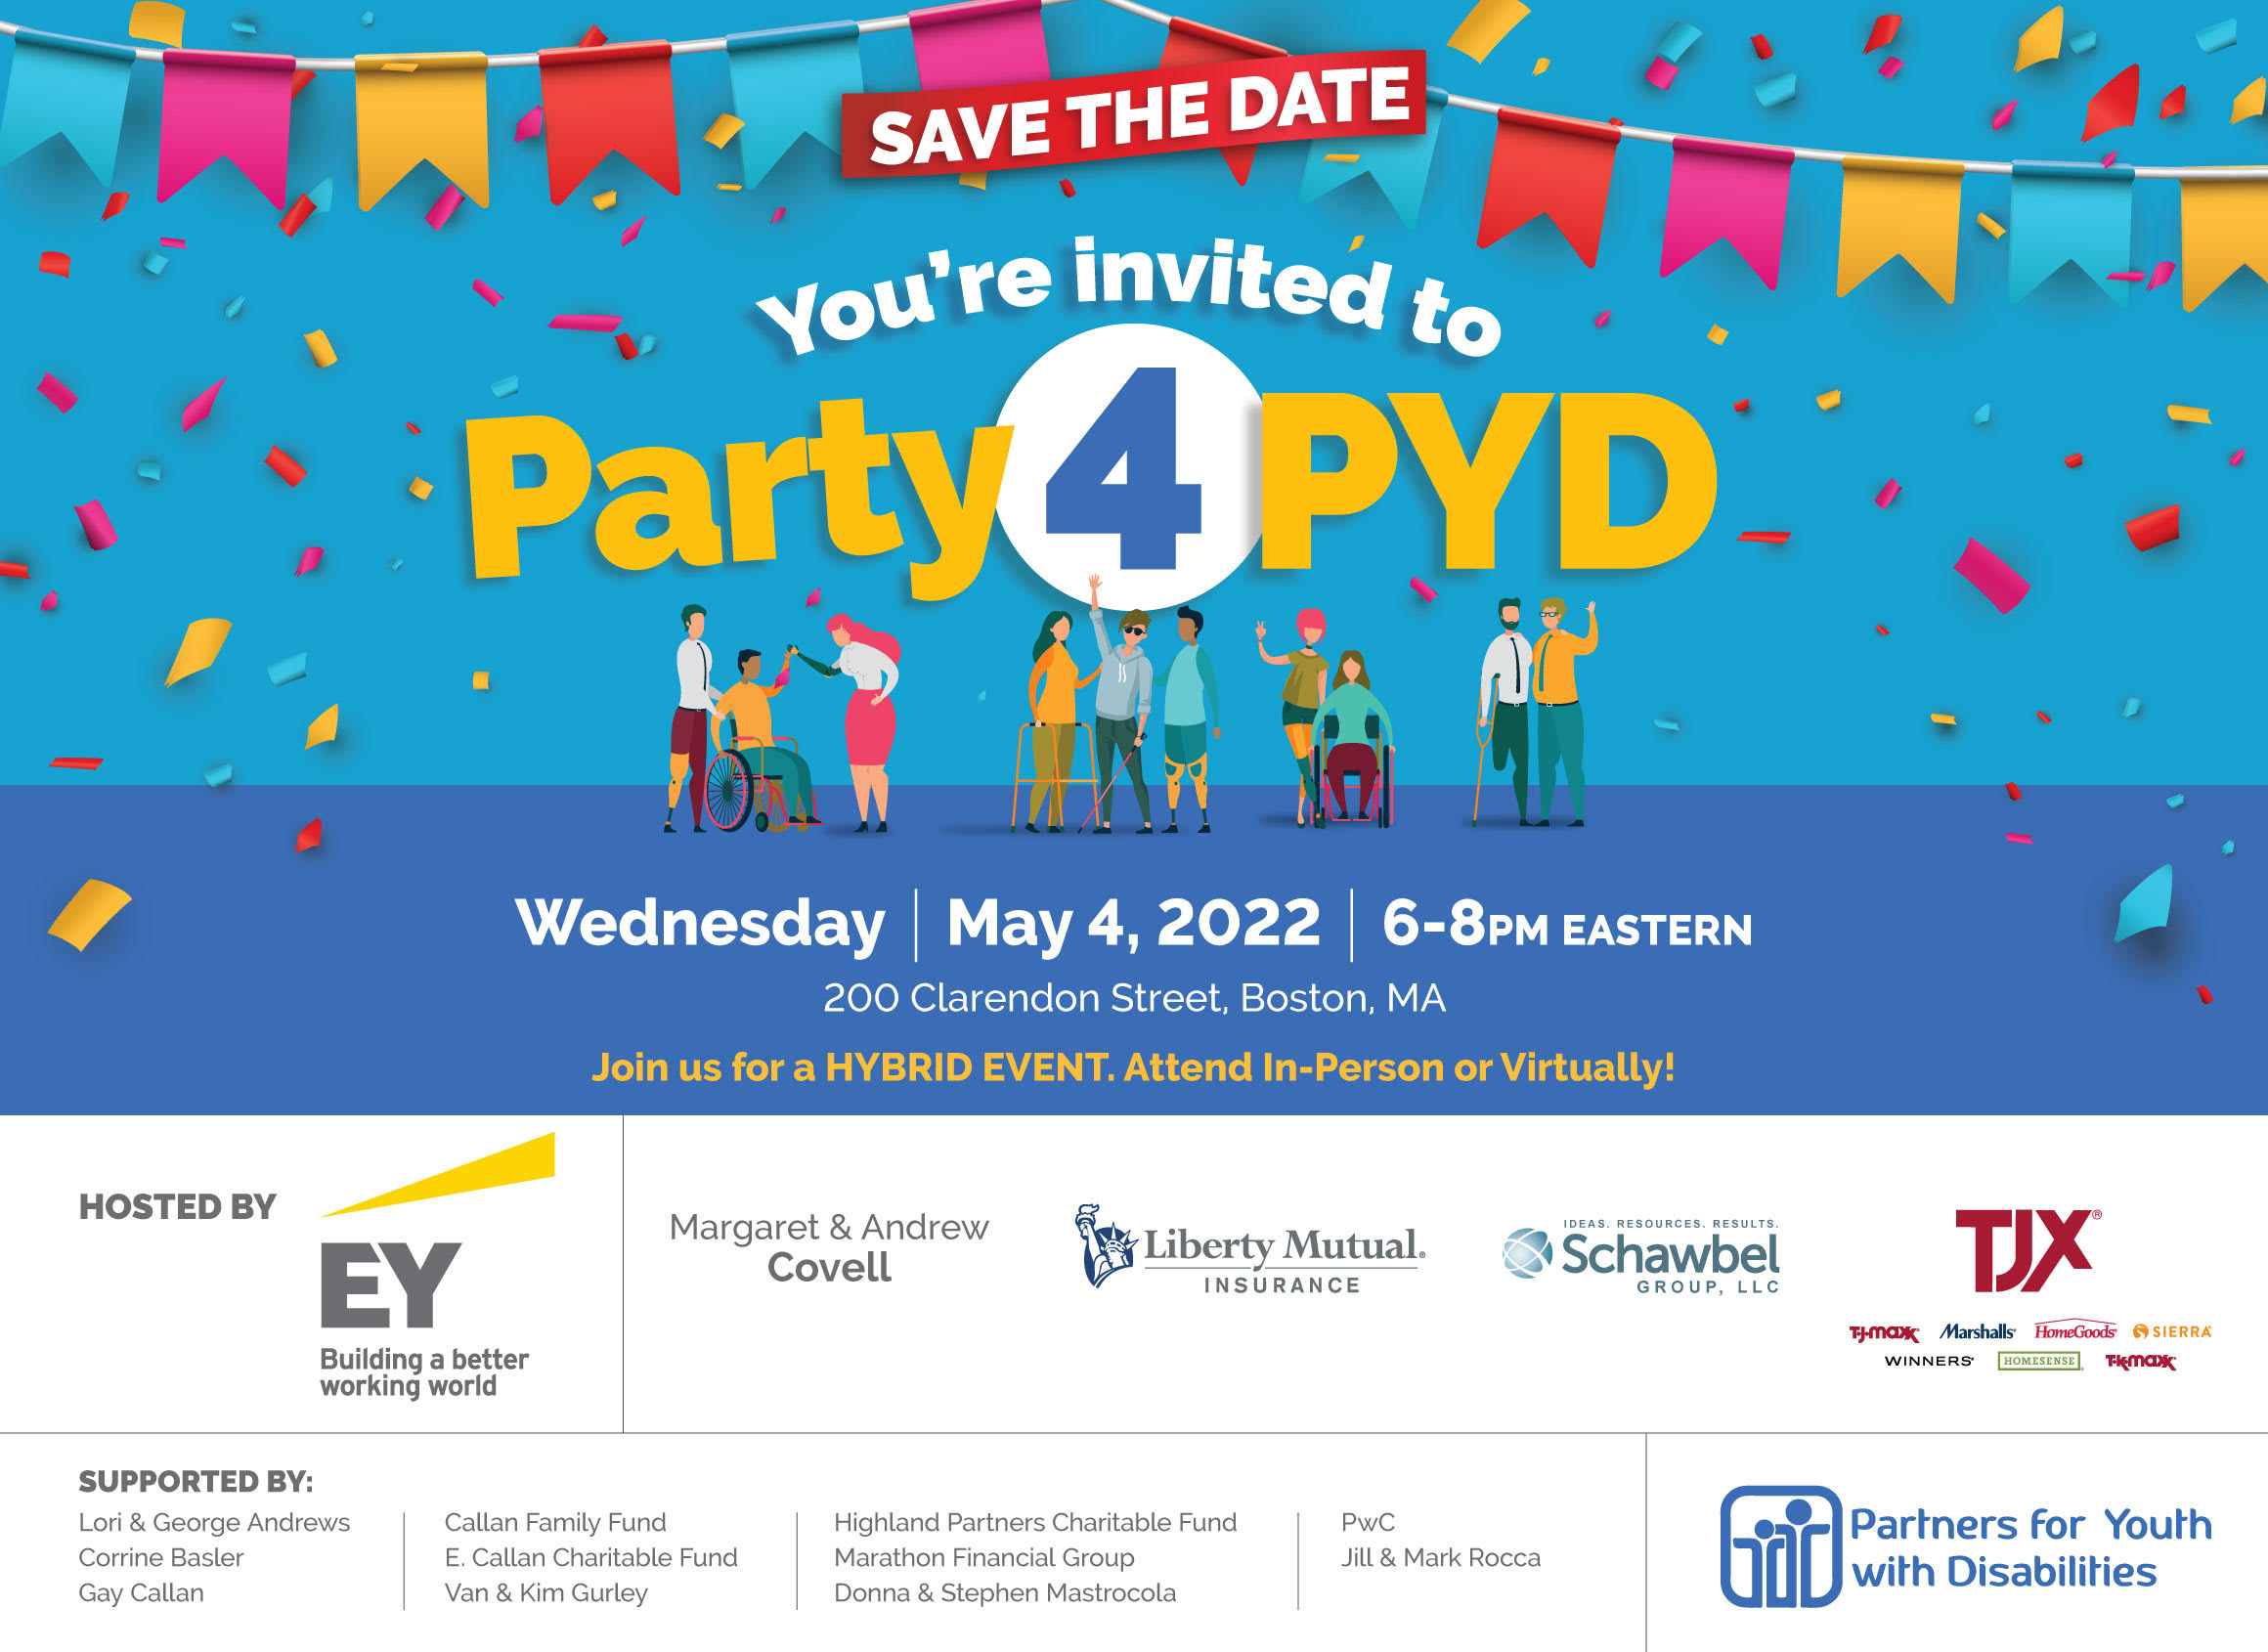 You're invited to Party for PYD on Wednesday, May 4th, 2022 from 6-8pm Eastern. Join us for a hybrid event: attend in-person or virtually!